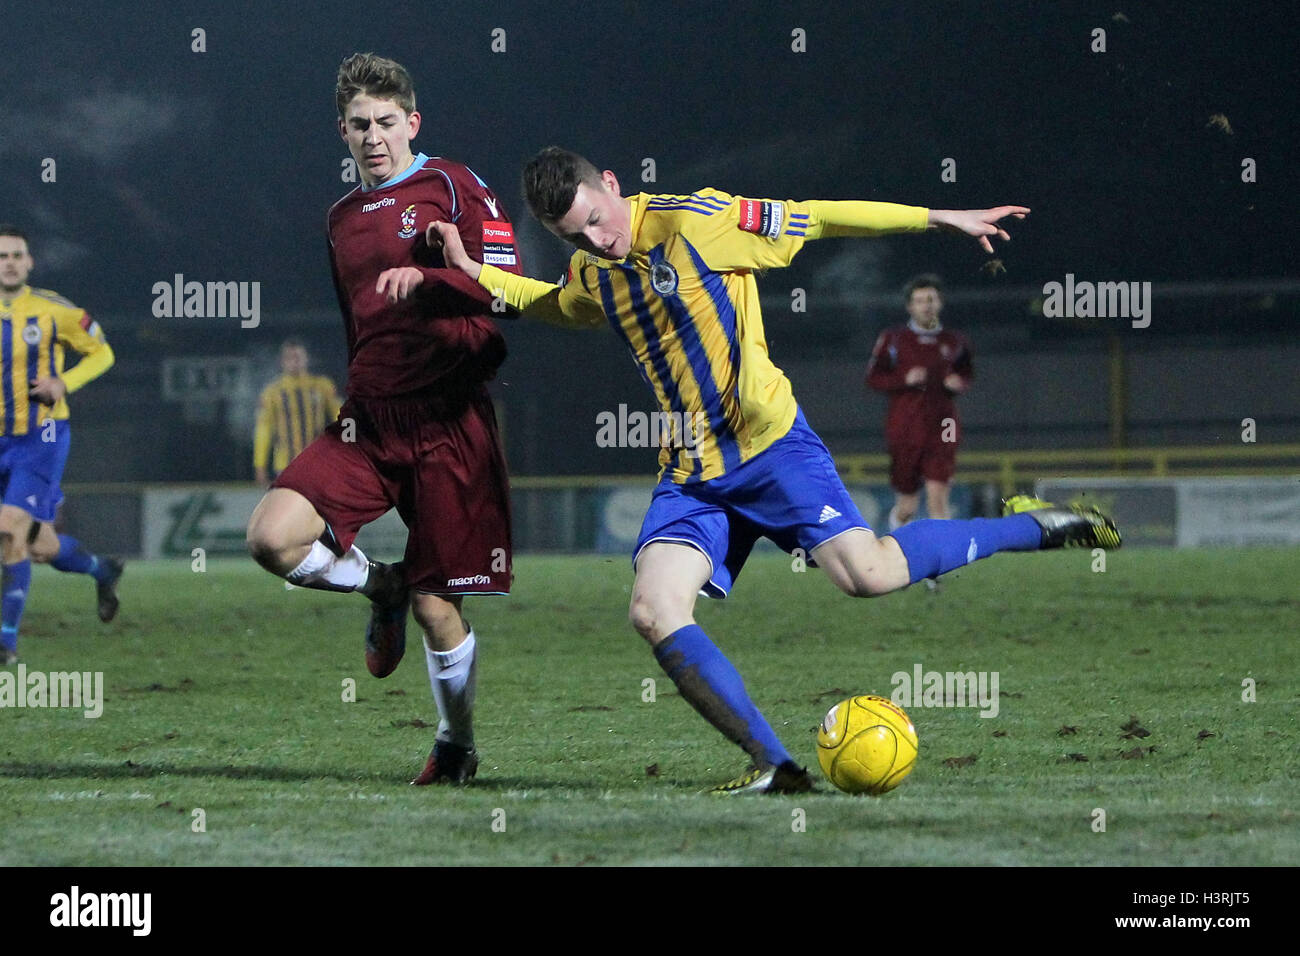 Kurt Smith of Romford evades Sam West of Brentwood - Romford vs Brentwood Town - Ryman League Division One North Football at Ship Lane, Thurrock FC - 09/01/13 Stock Photo